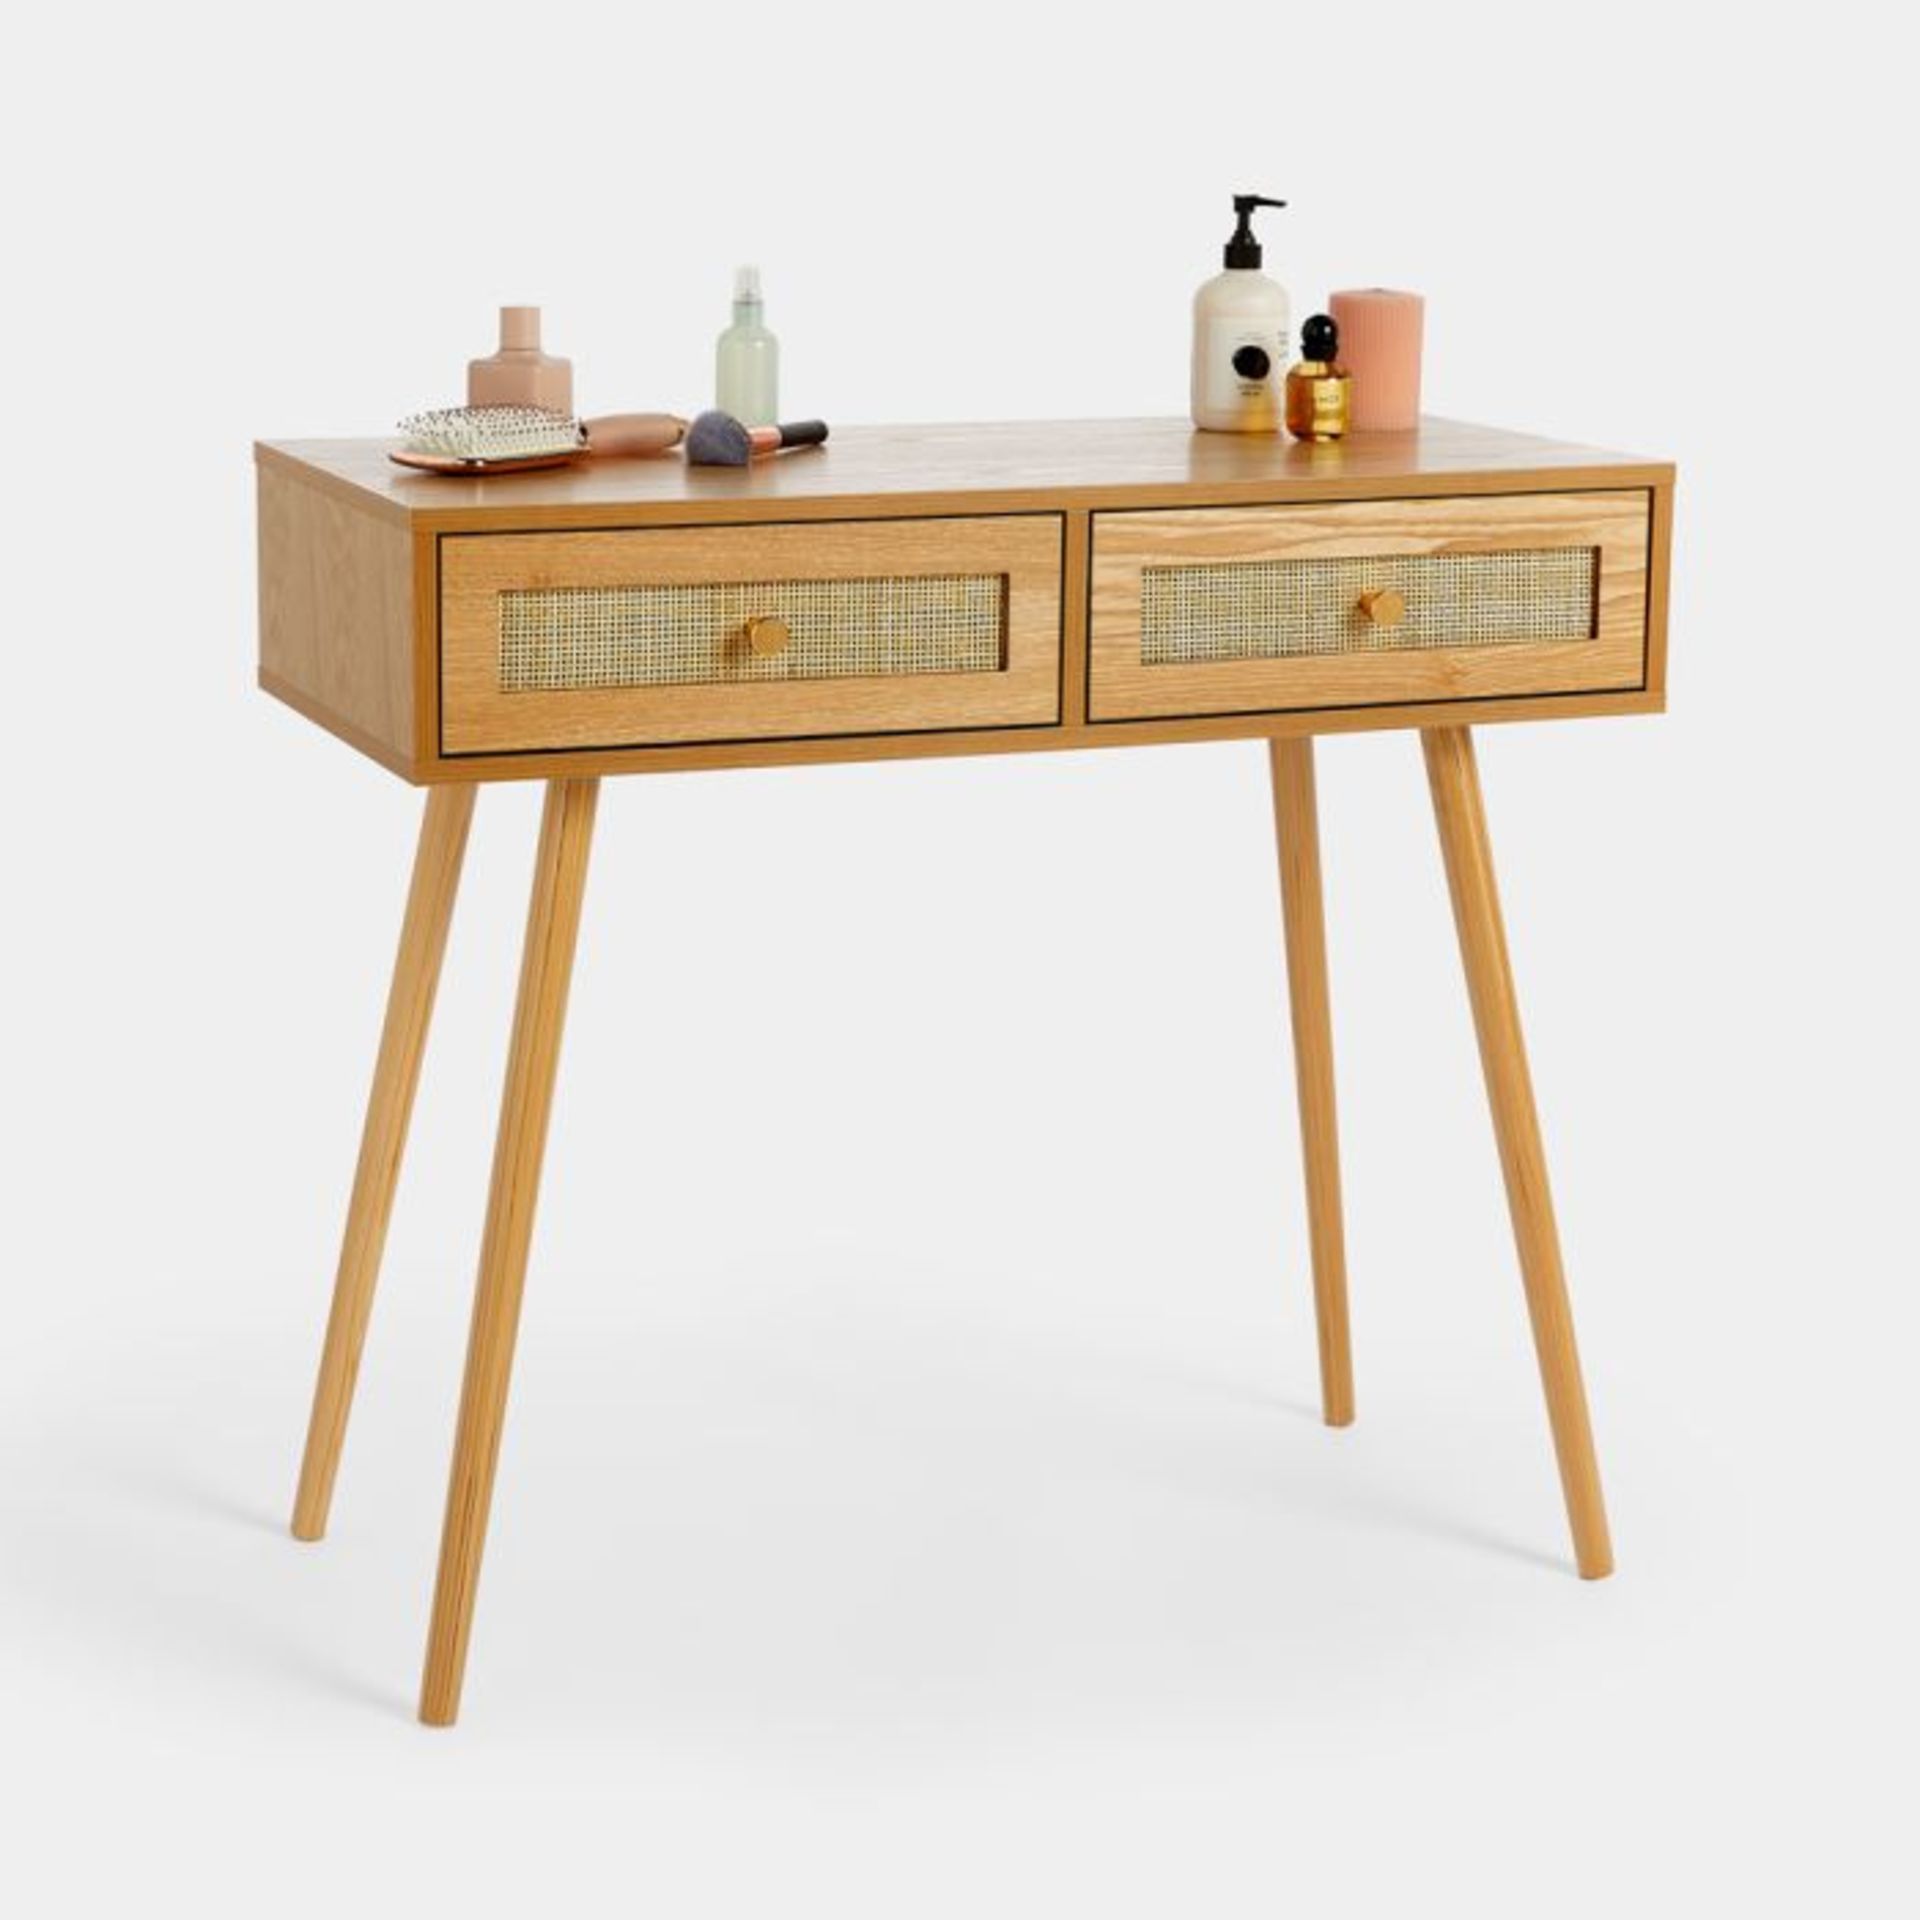 Rattan Dressing Table Desk. - ER33. Bring an earthy, natural feel to your space with a combination